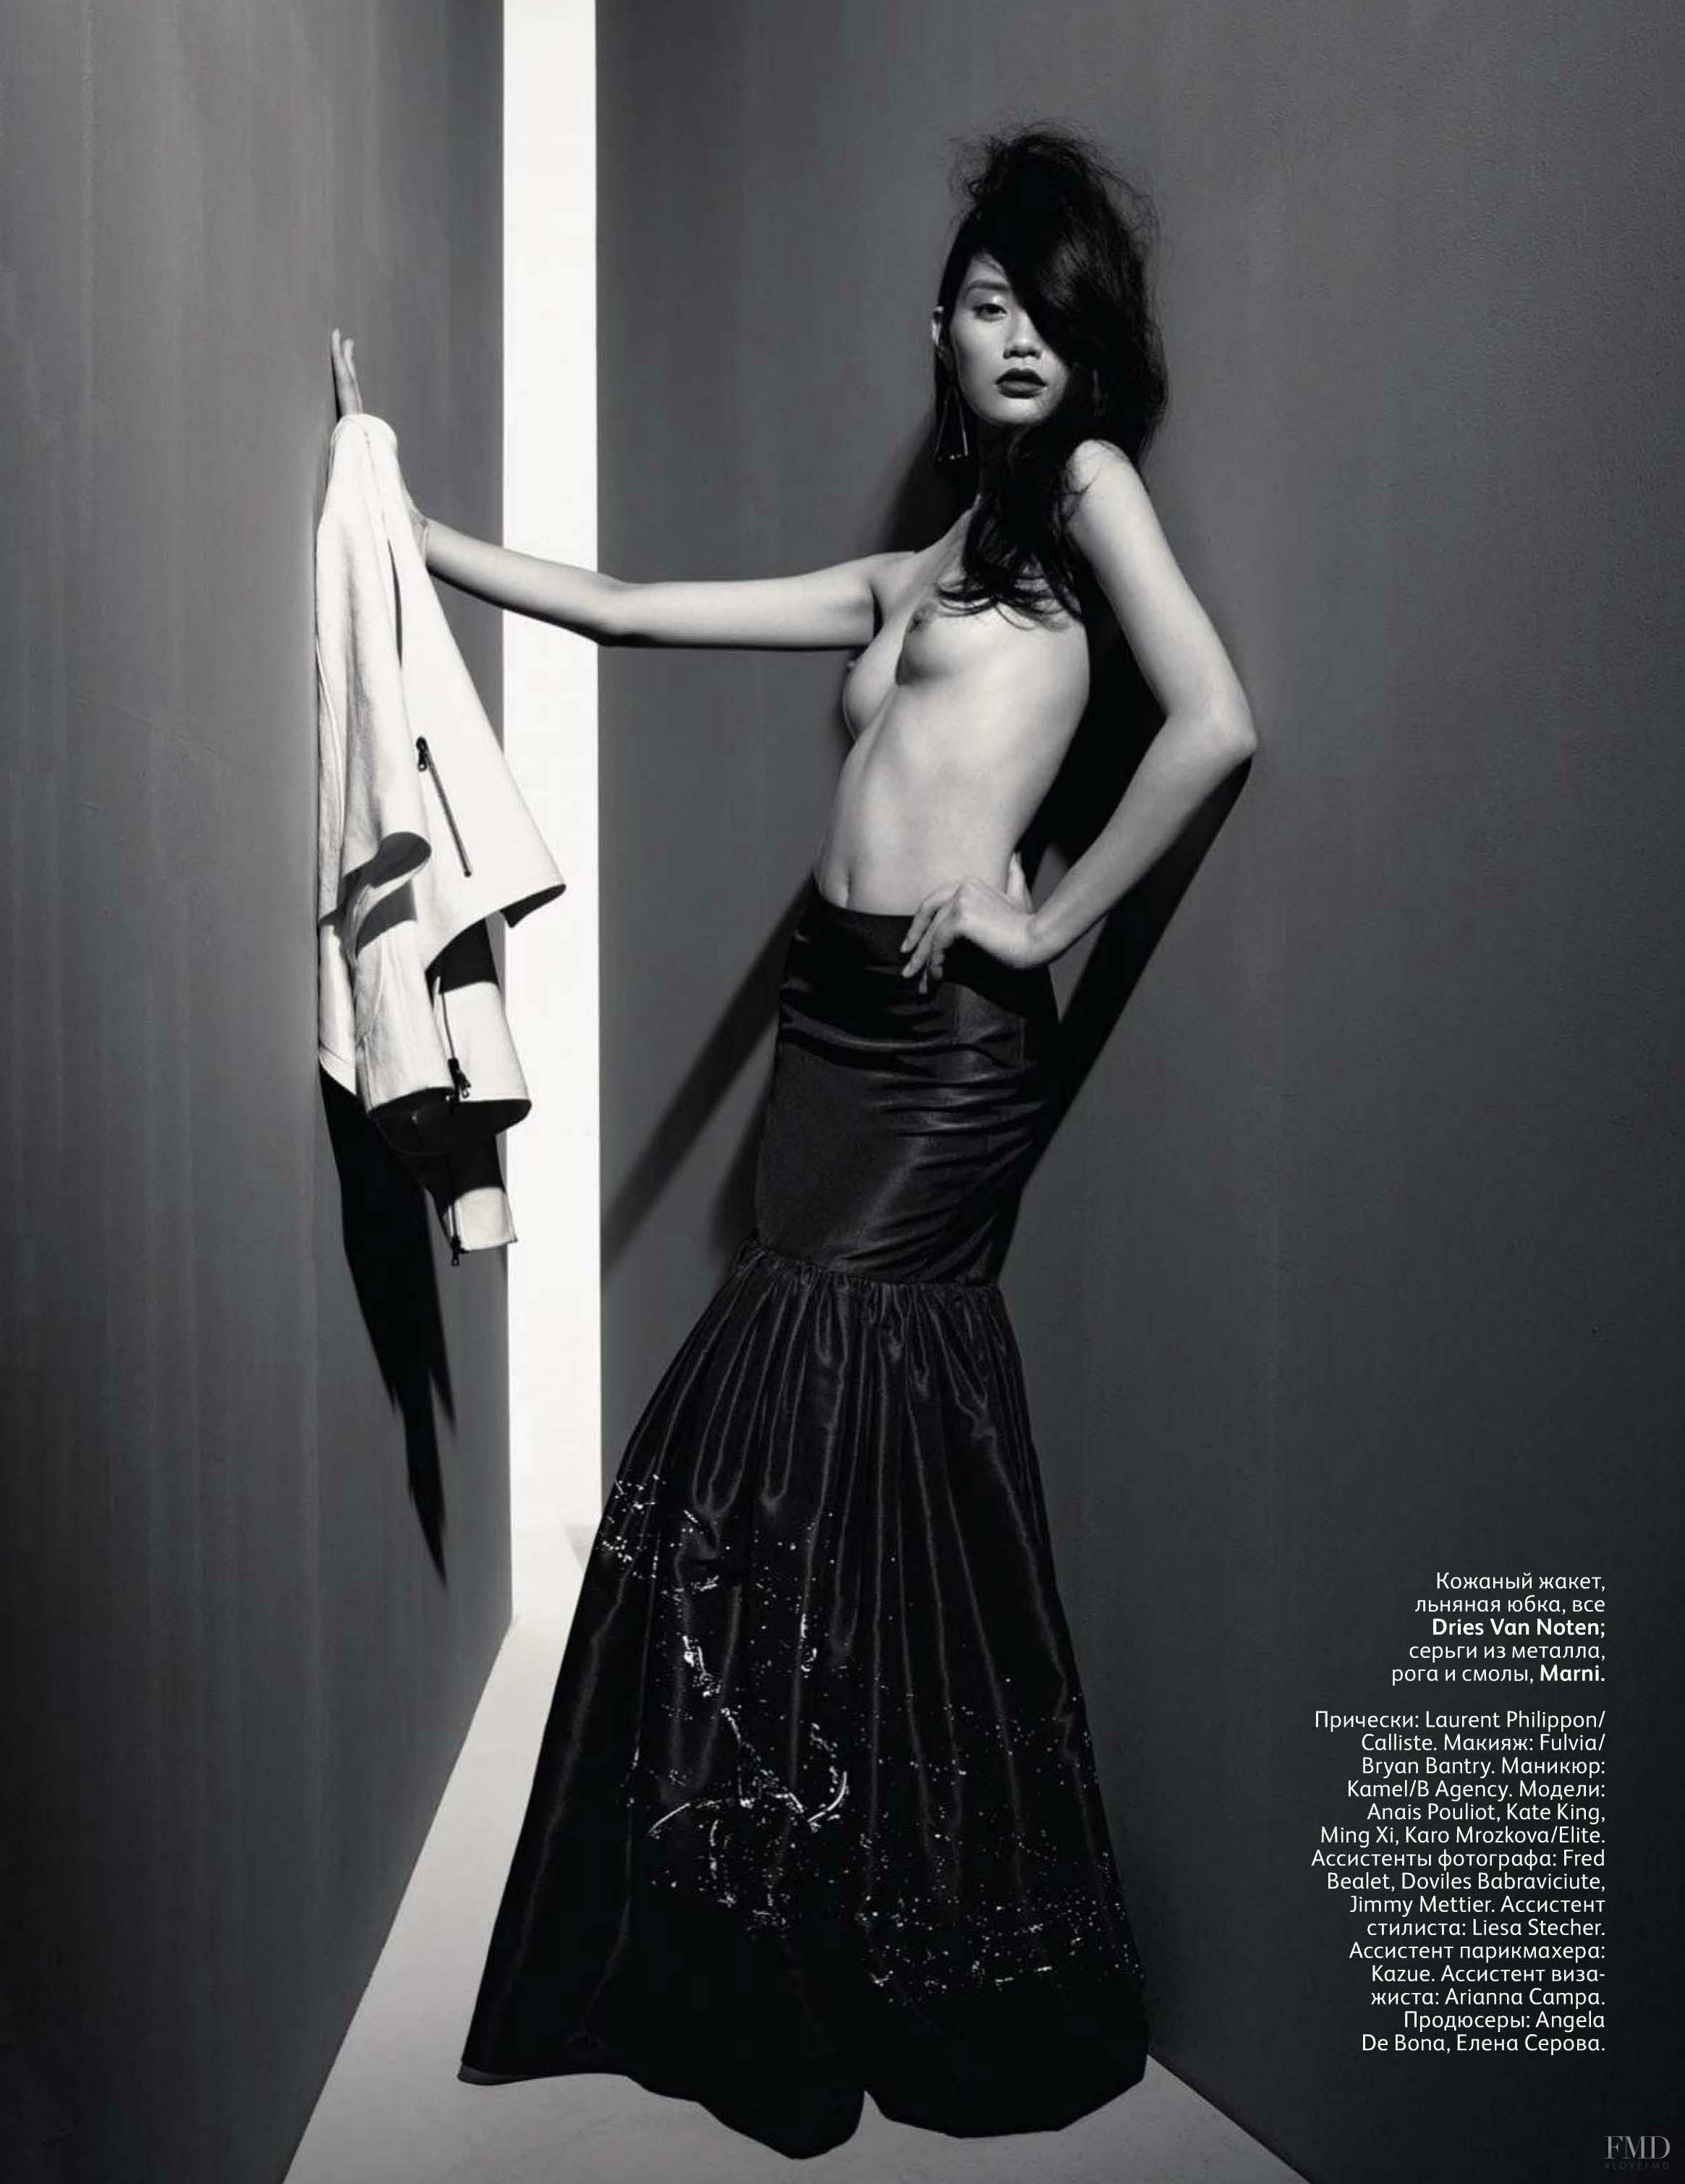 Ming Xi featured in Clairvoyance, February 2012.